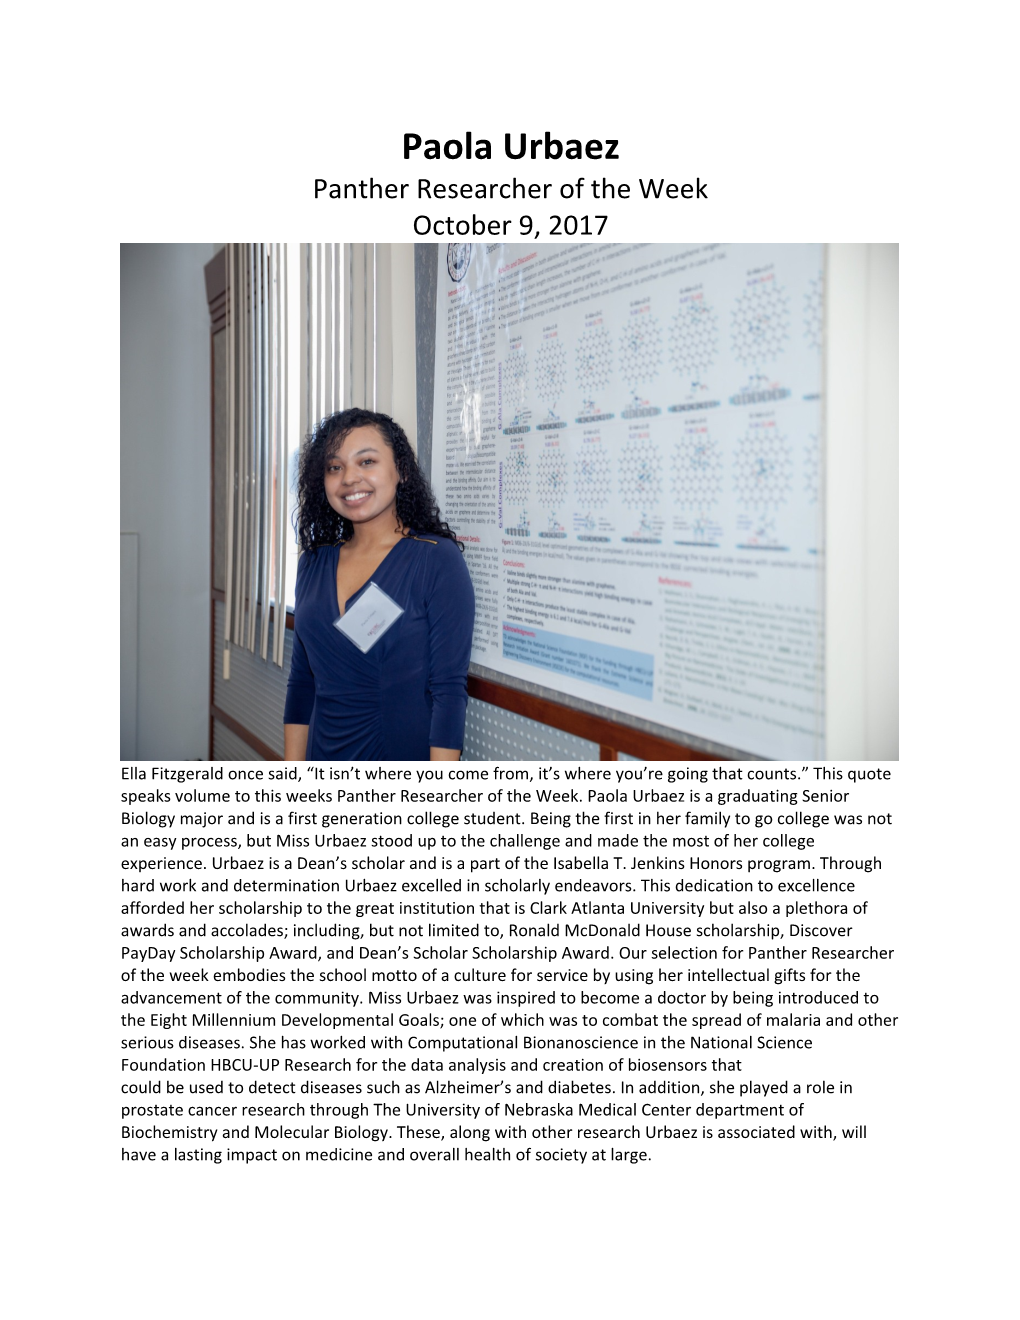 Panther Researcher of the Week